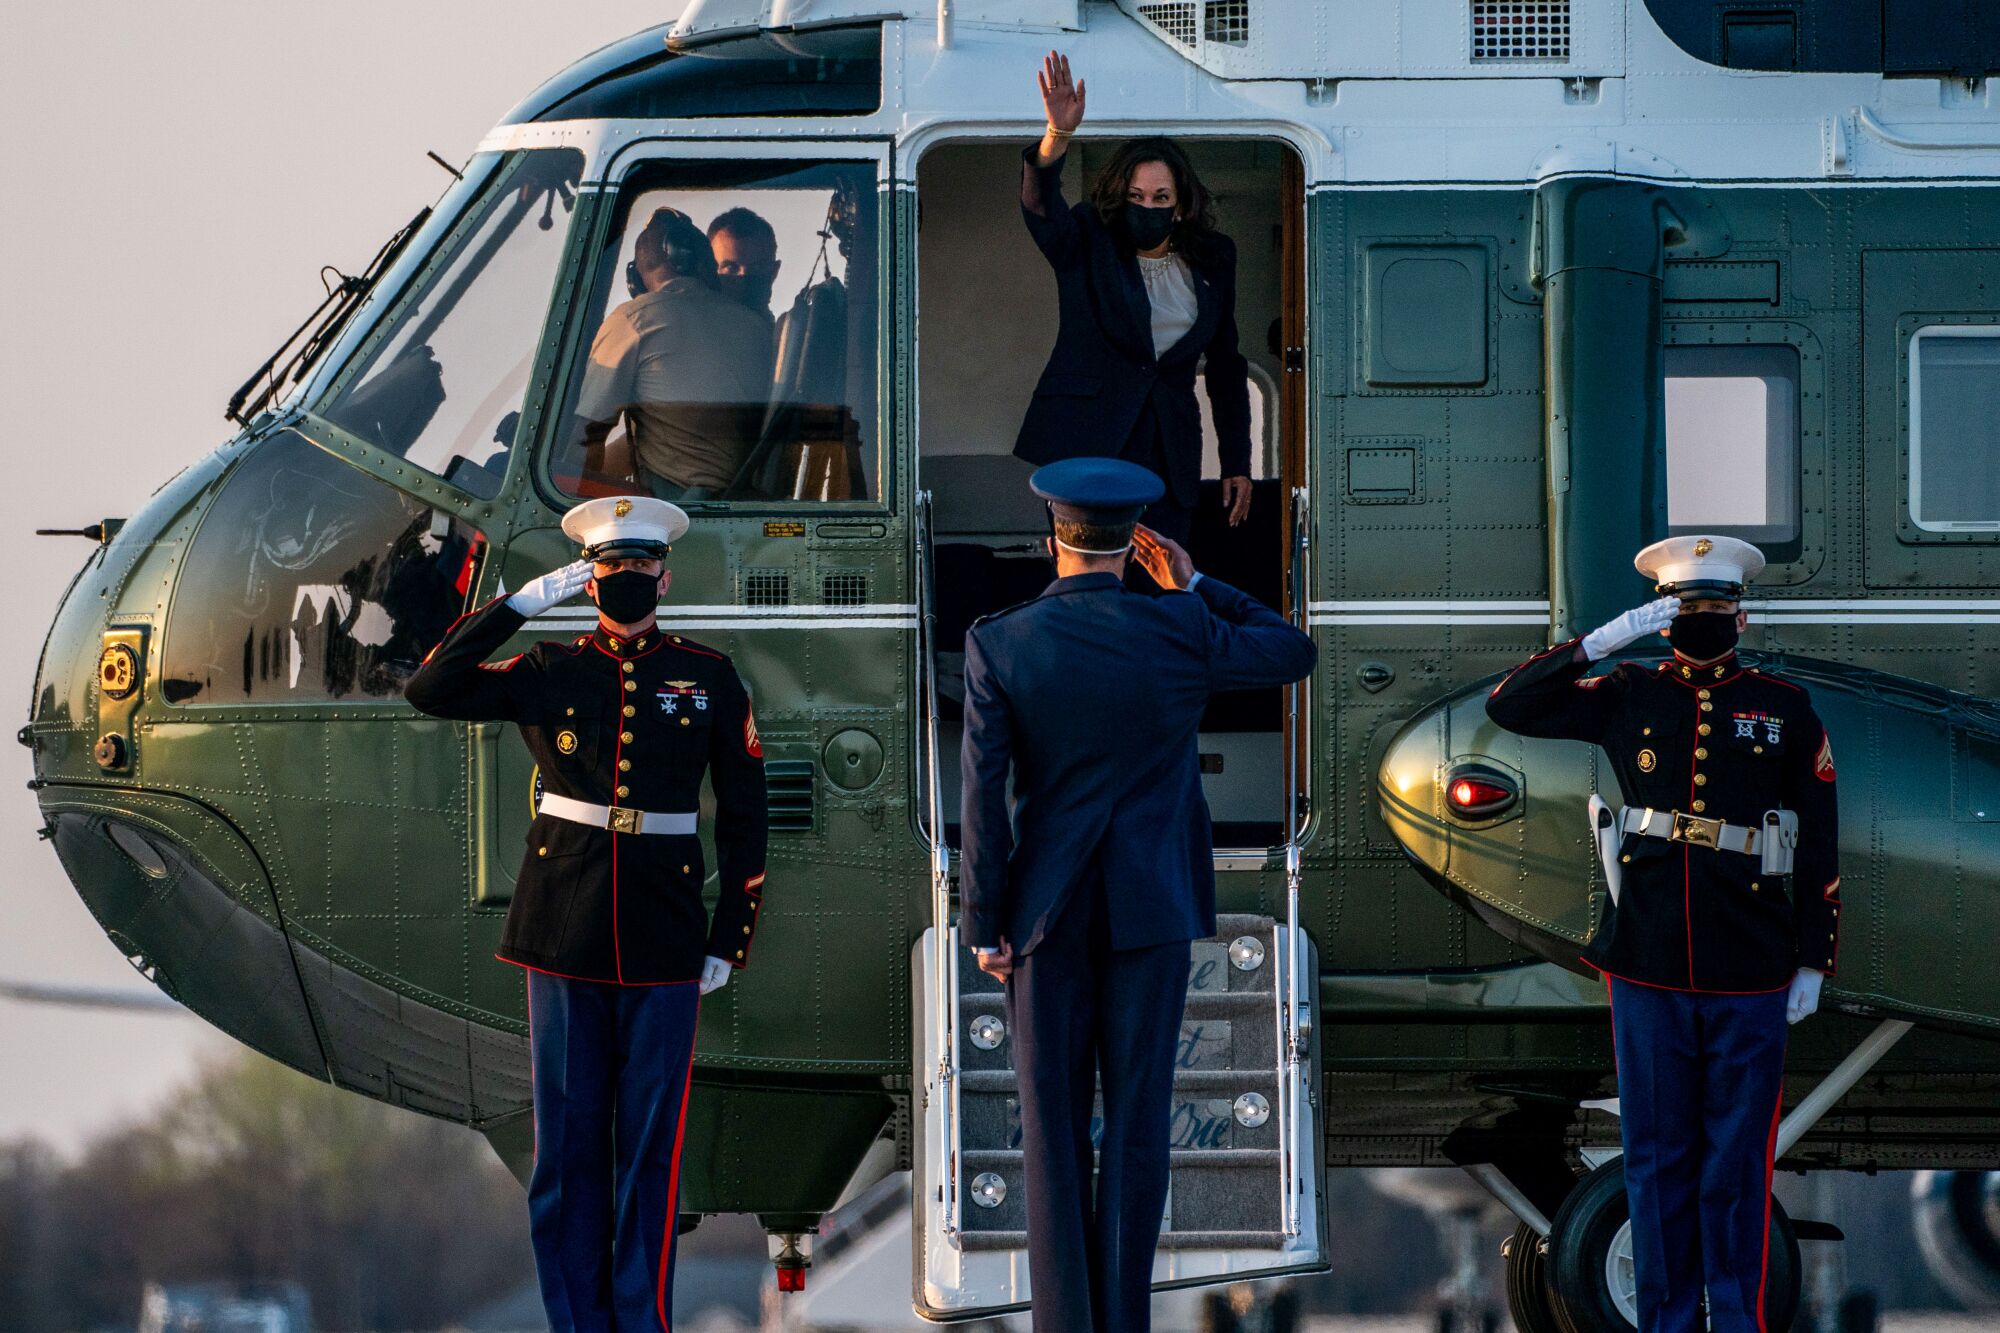 Kamala Harris waves from a helicopter as a man salutes her.